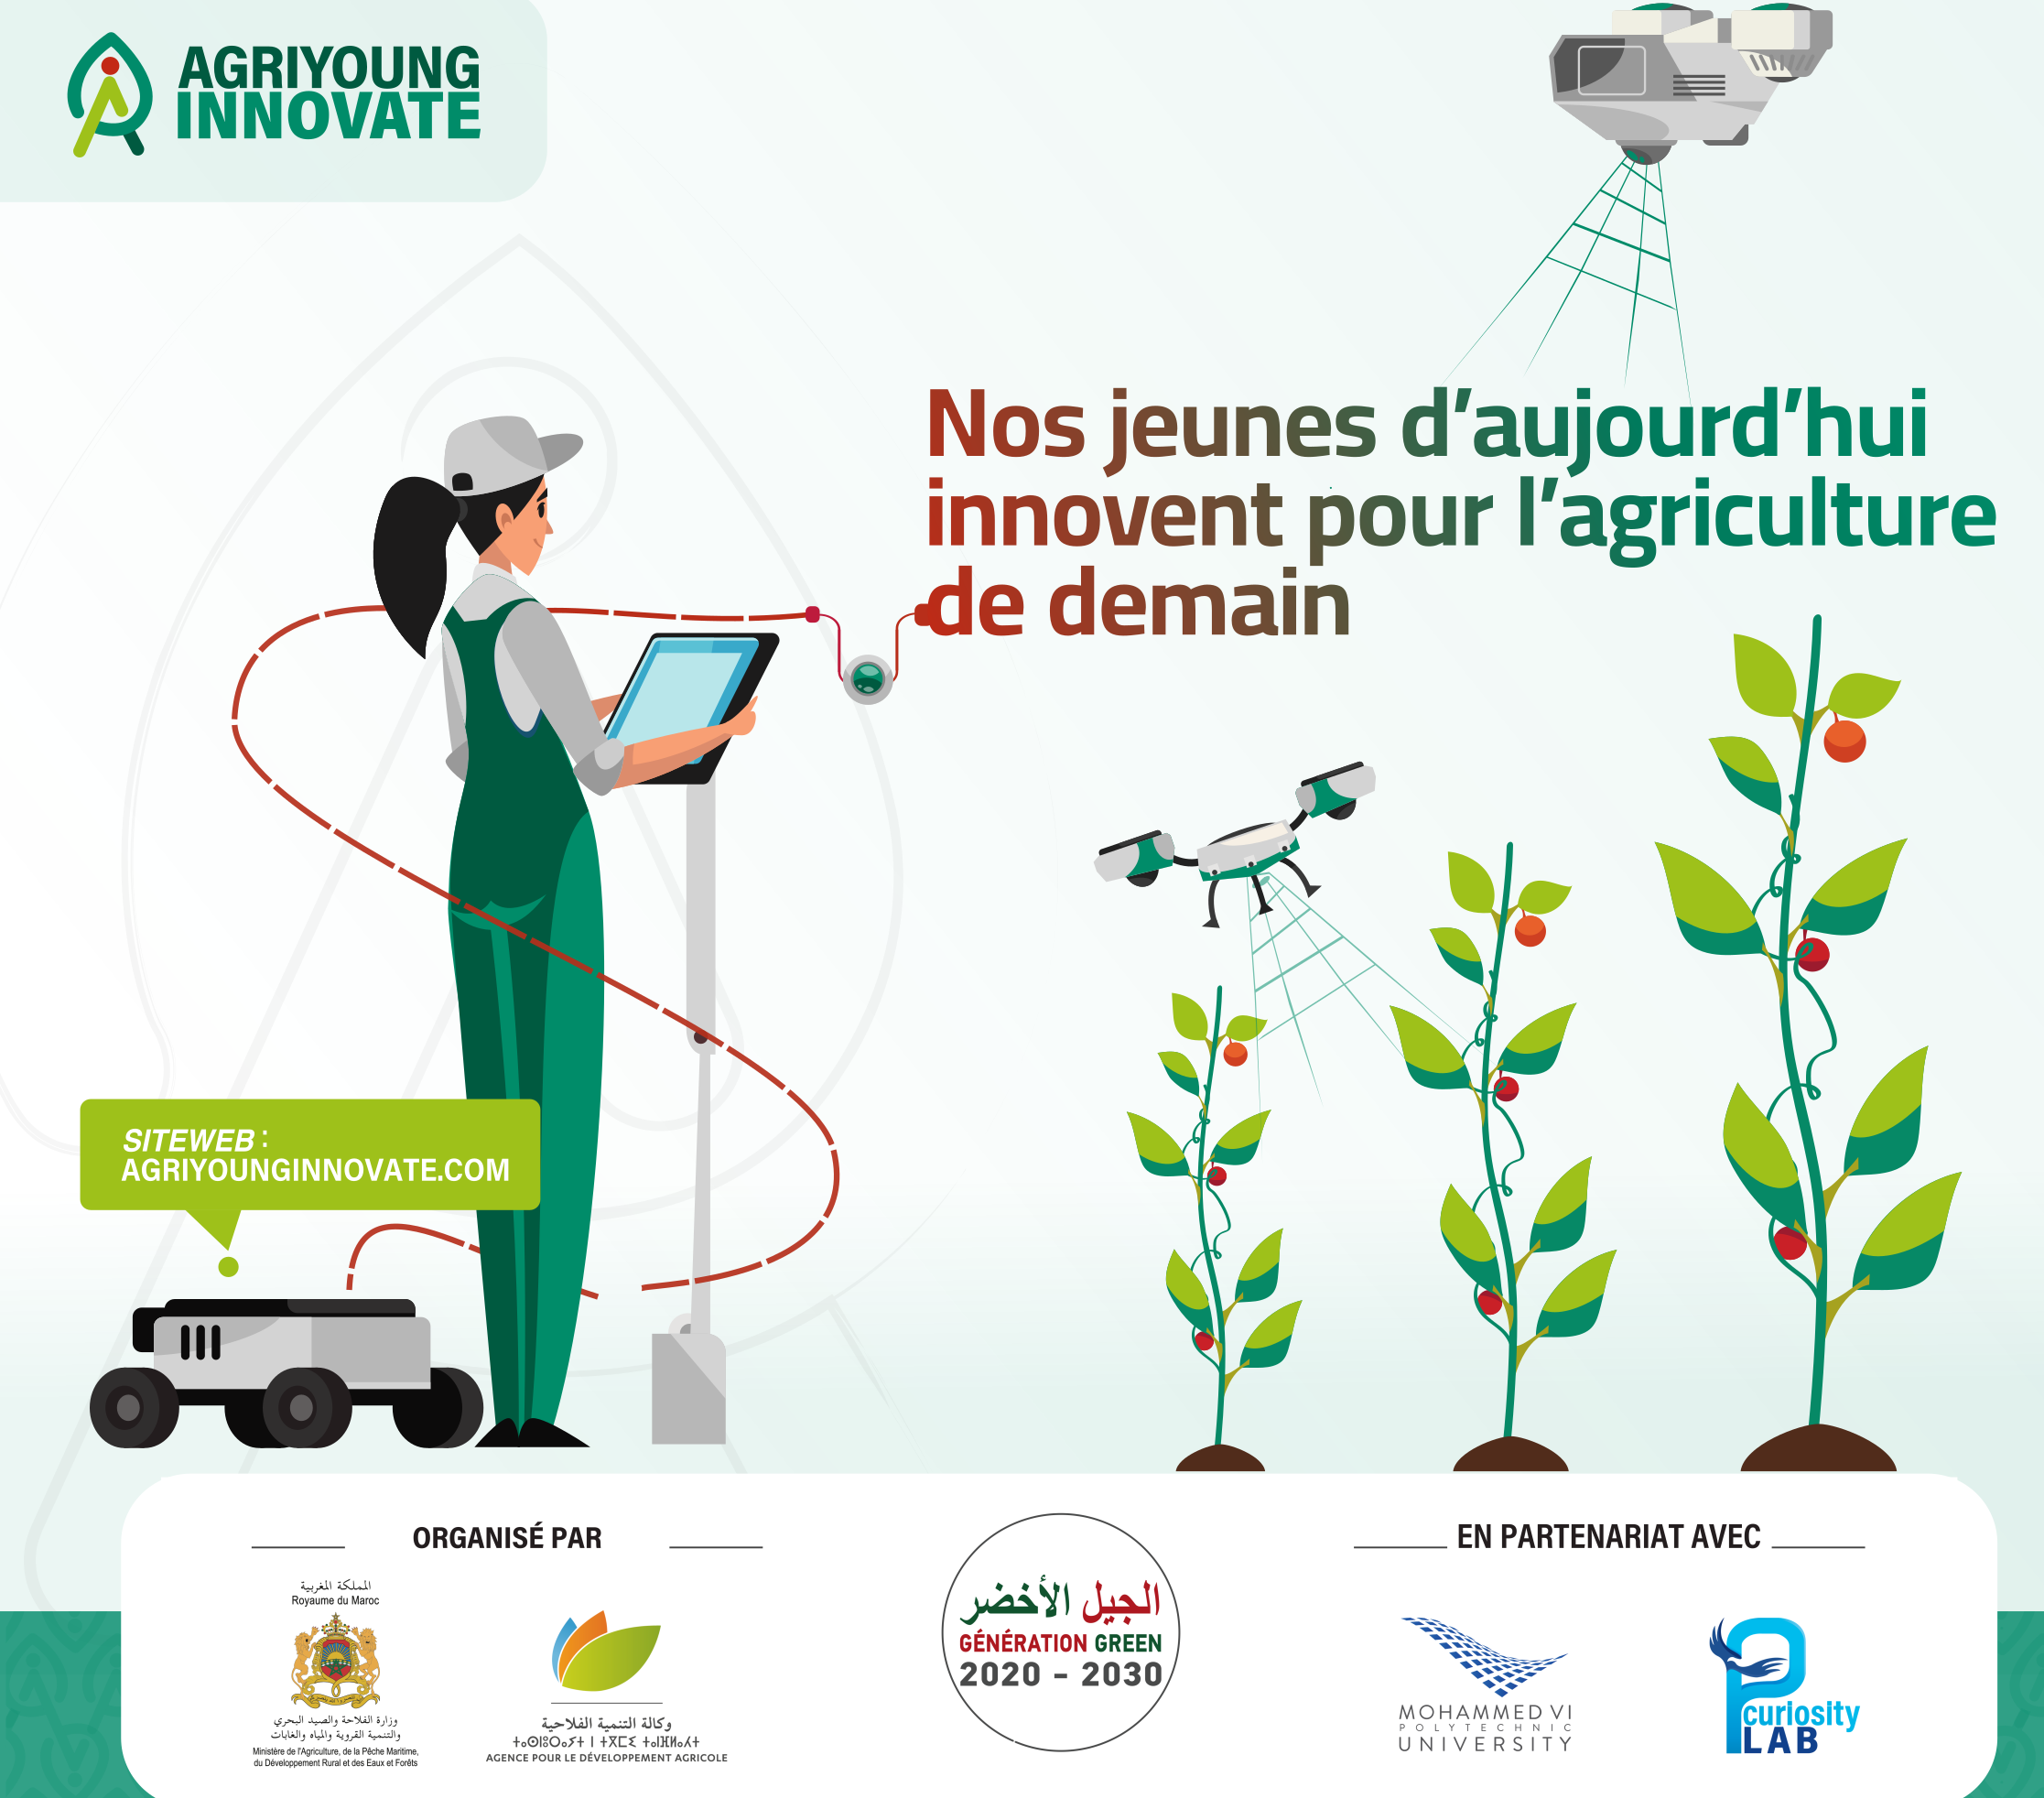 L'ADA lance le concours national "Agriyoung Innovate"